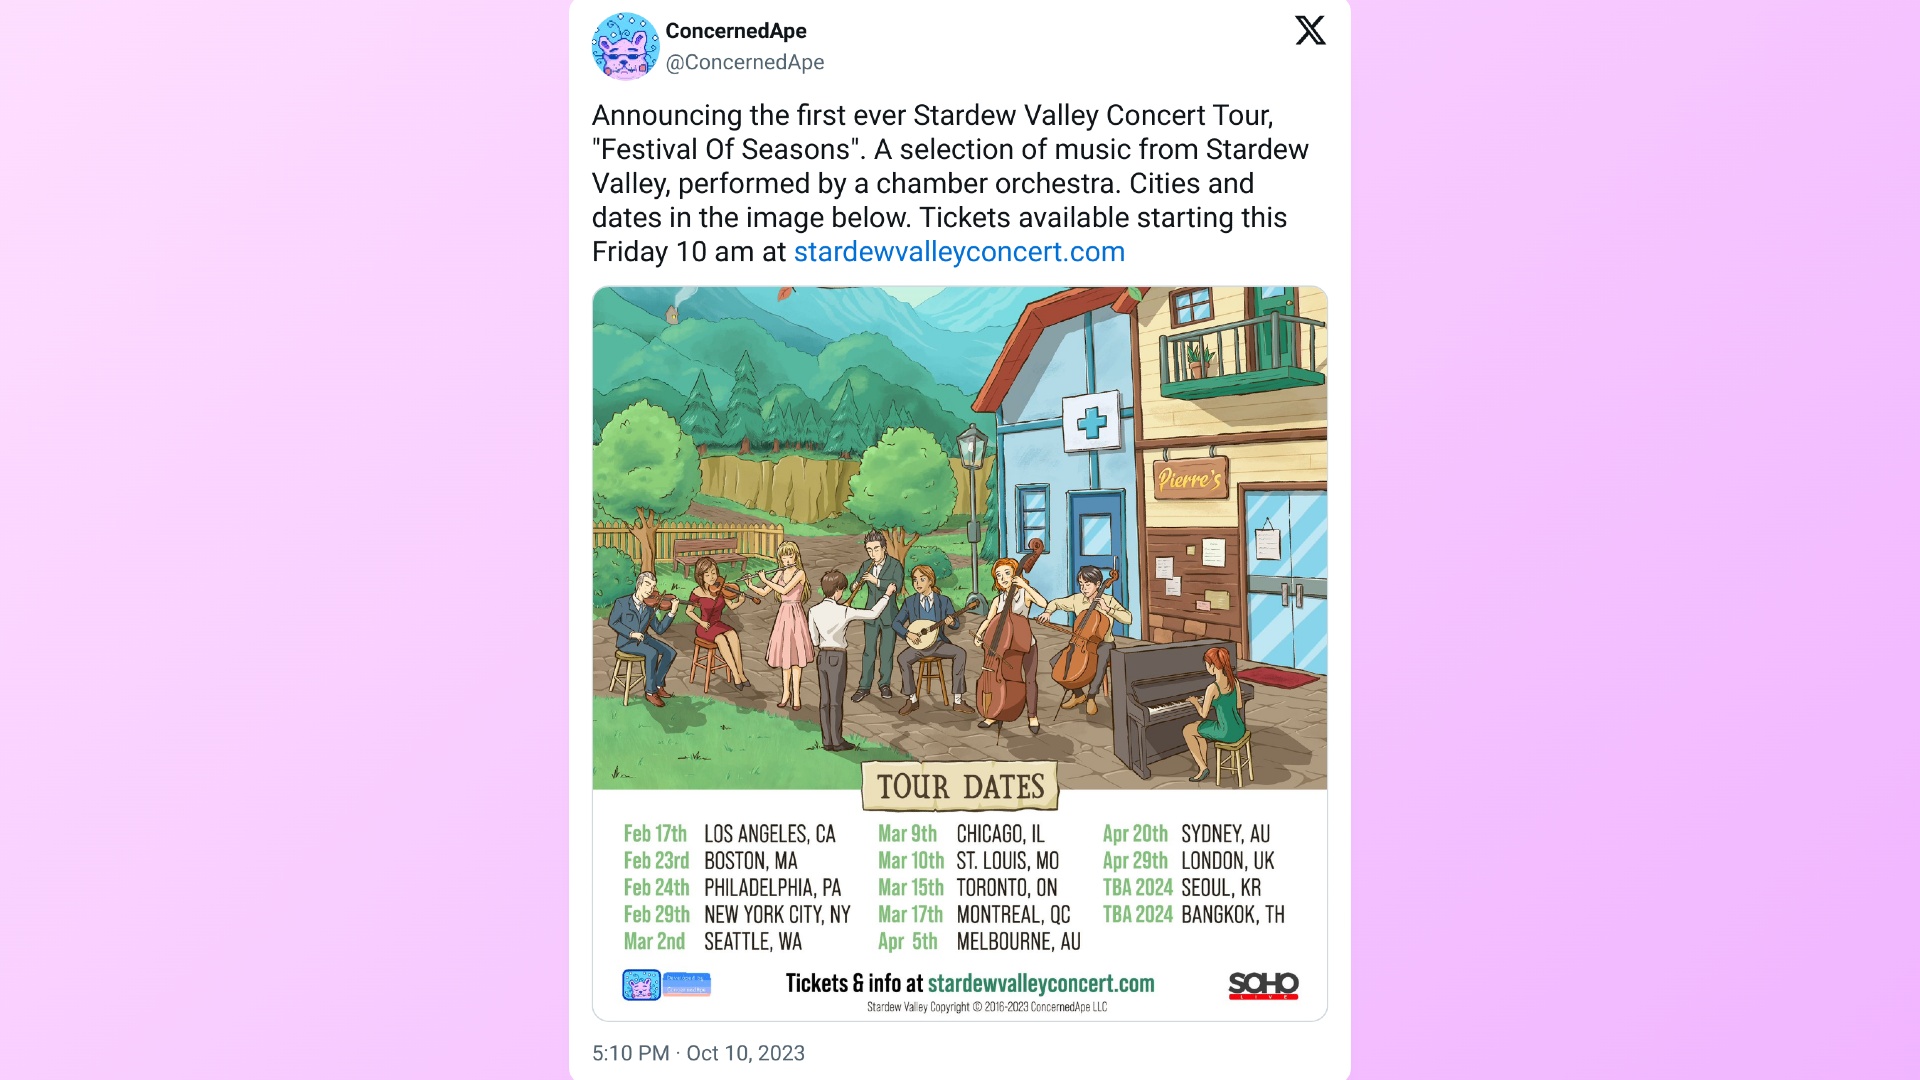 ConcernedApe's post revealing the Stardew Valley concert tour and its dates